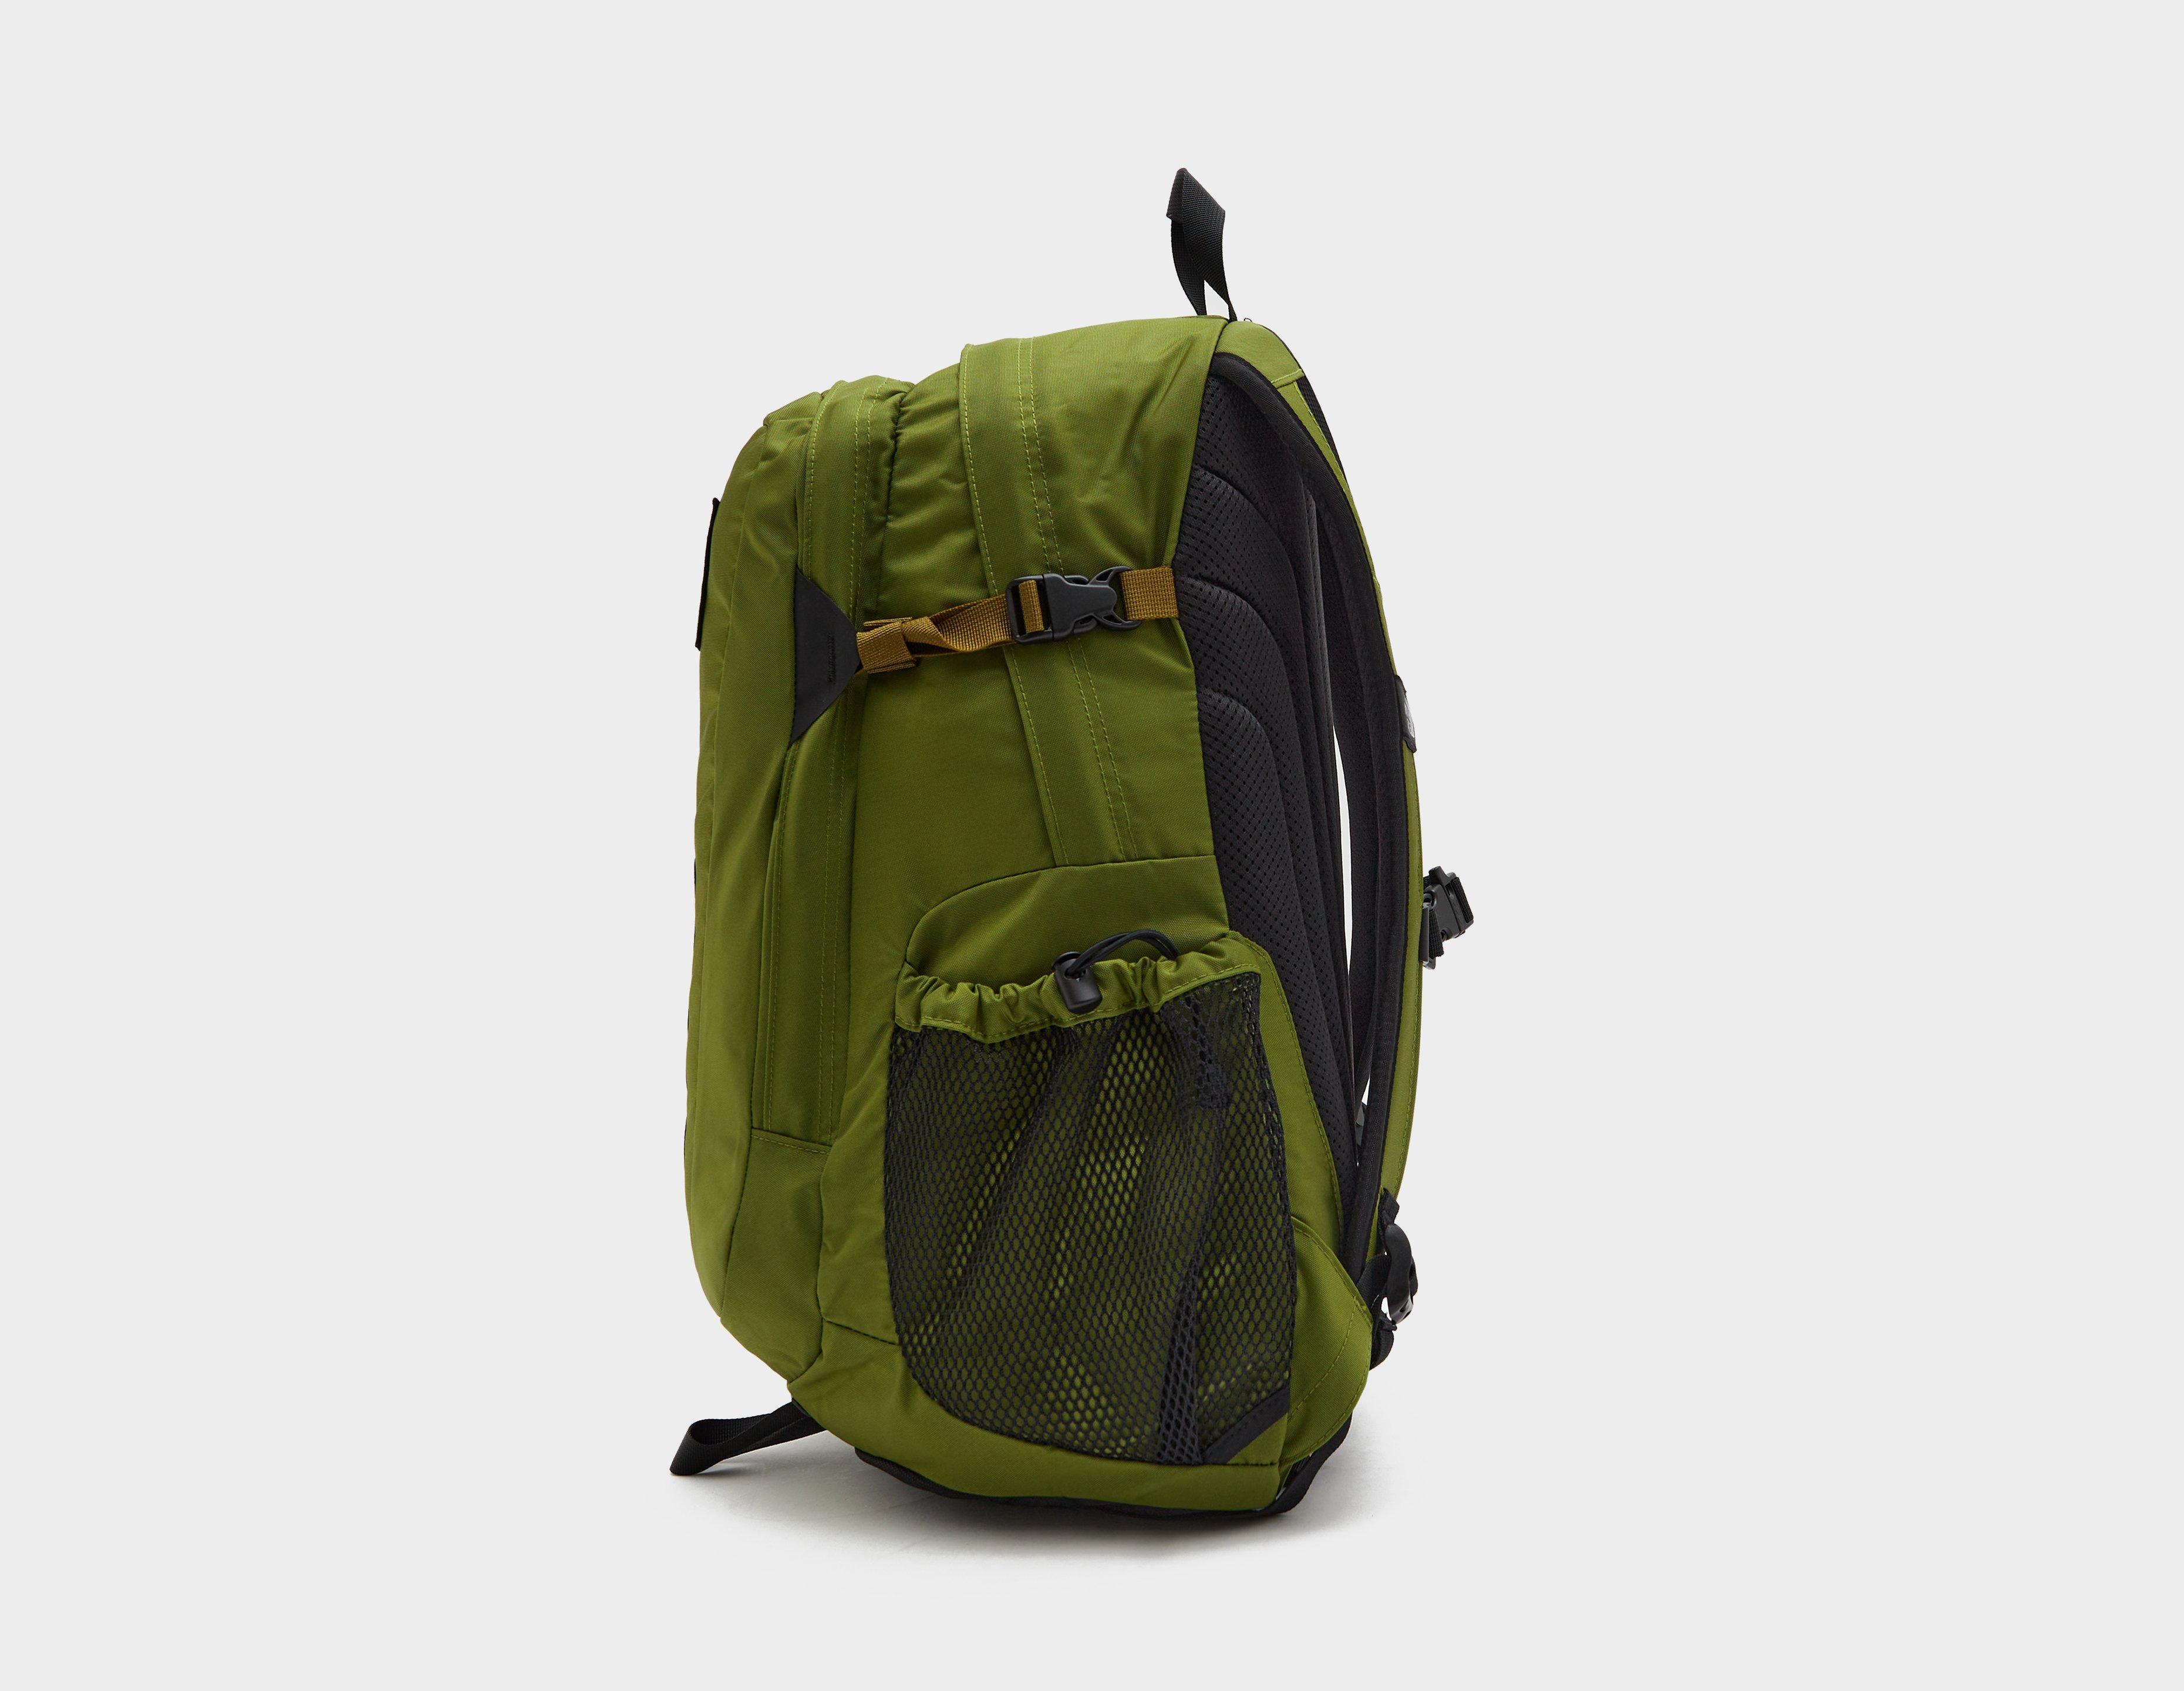 The North Face Sac à Dos Vert- Size? France